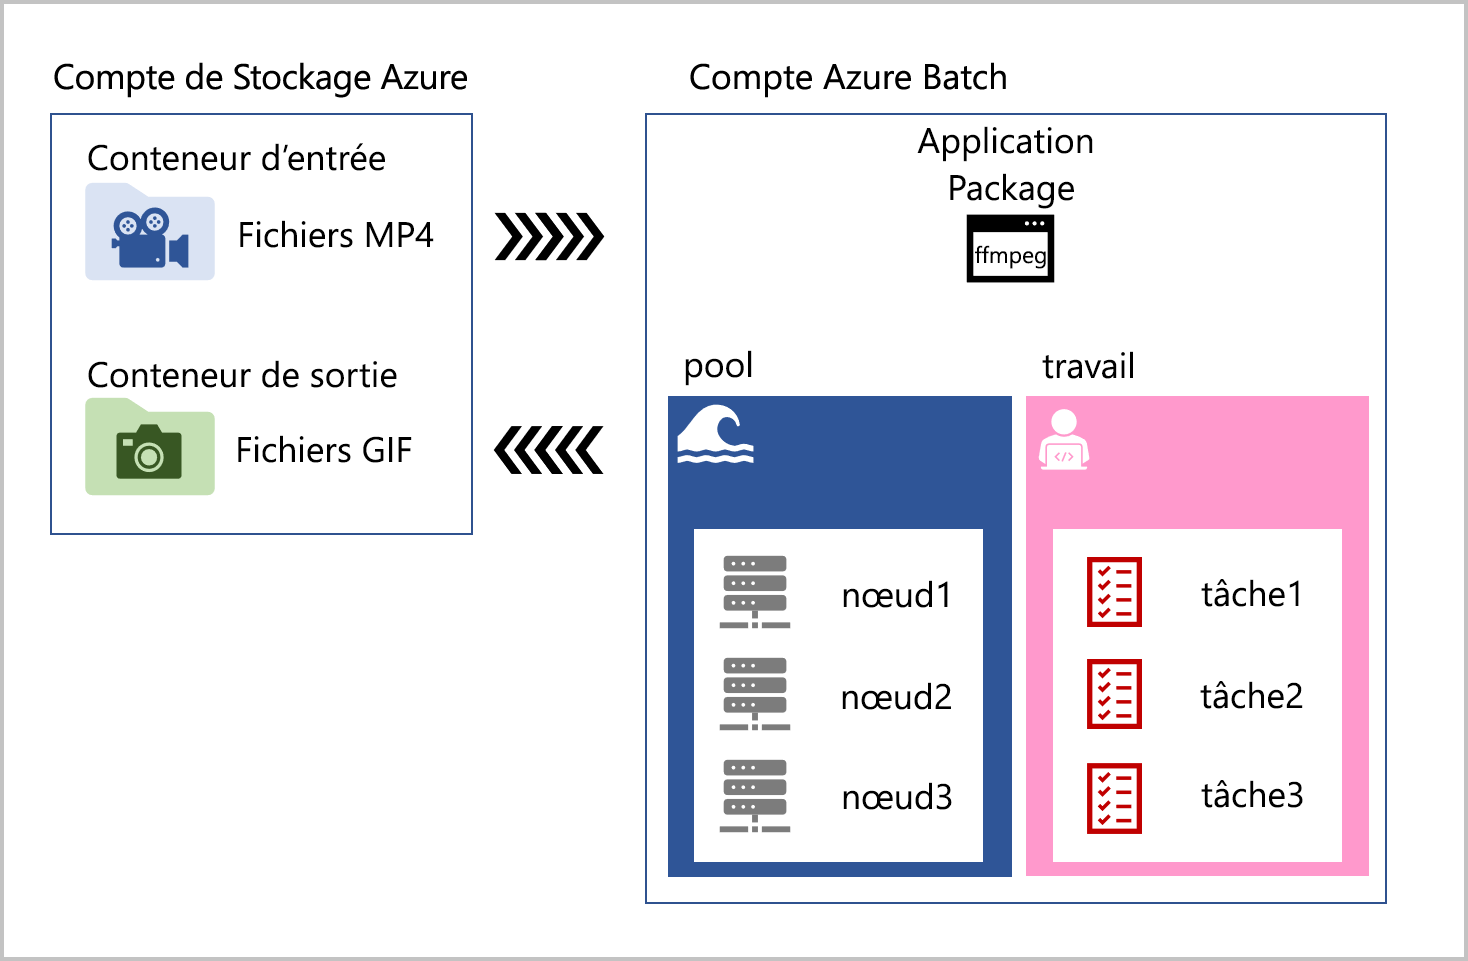 Diagram showing how an app can use Azure Storage and Azure Batch to run apps on compute nodes in pools.